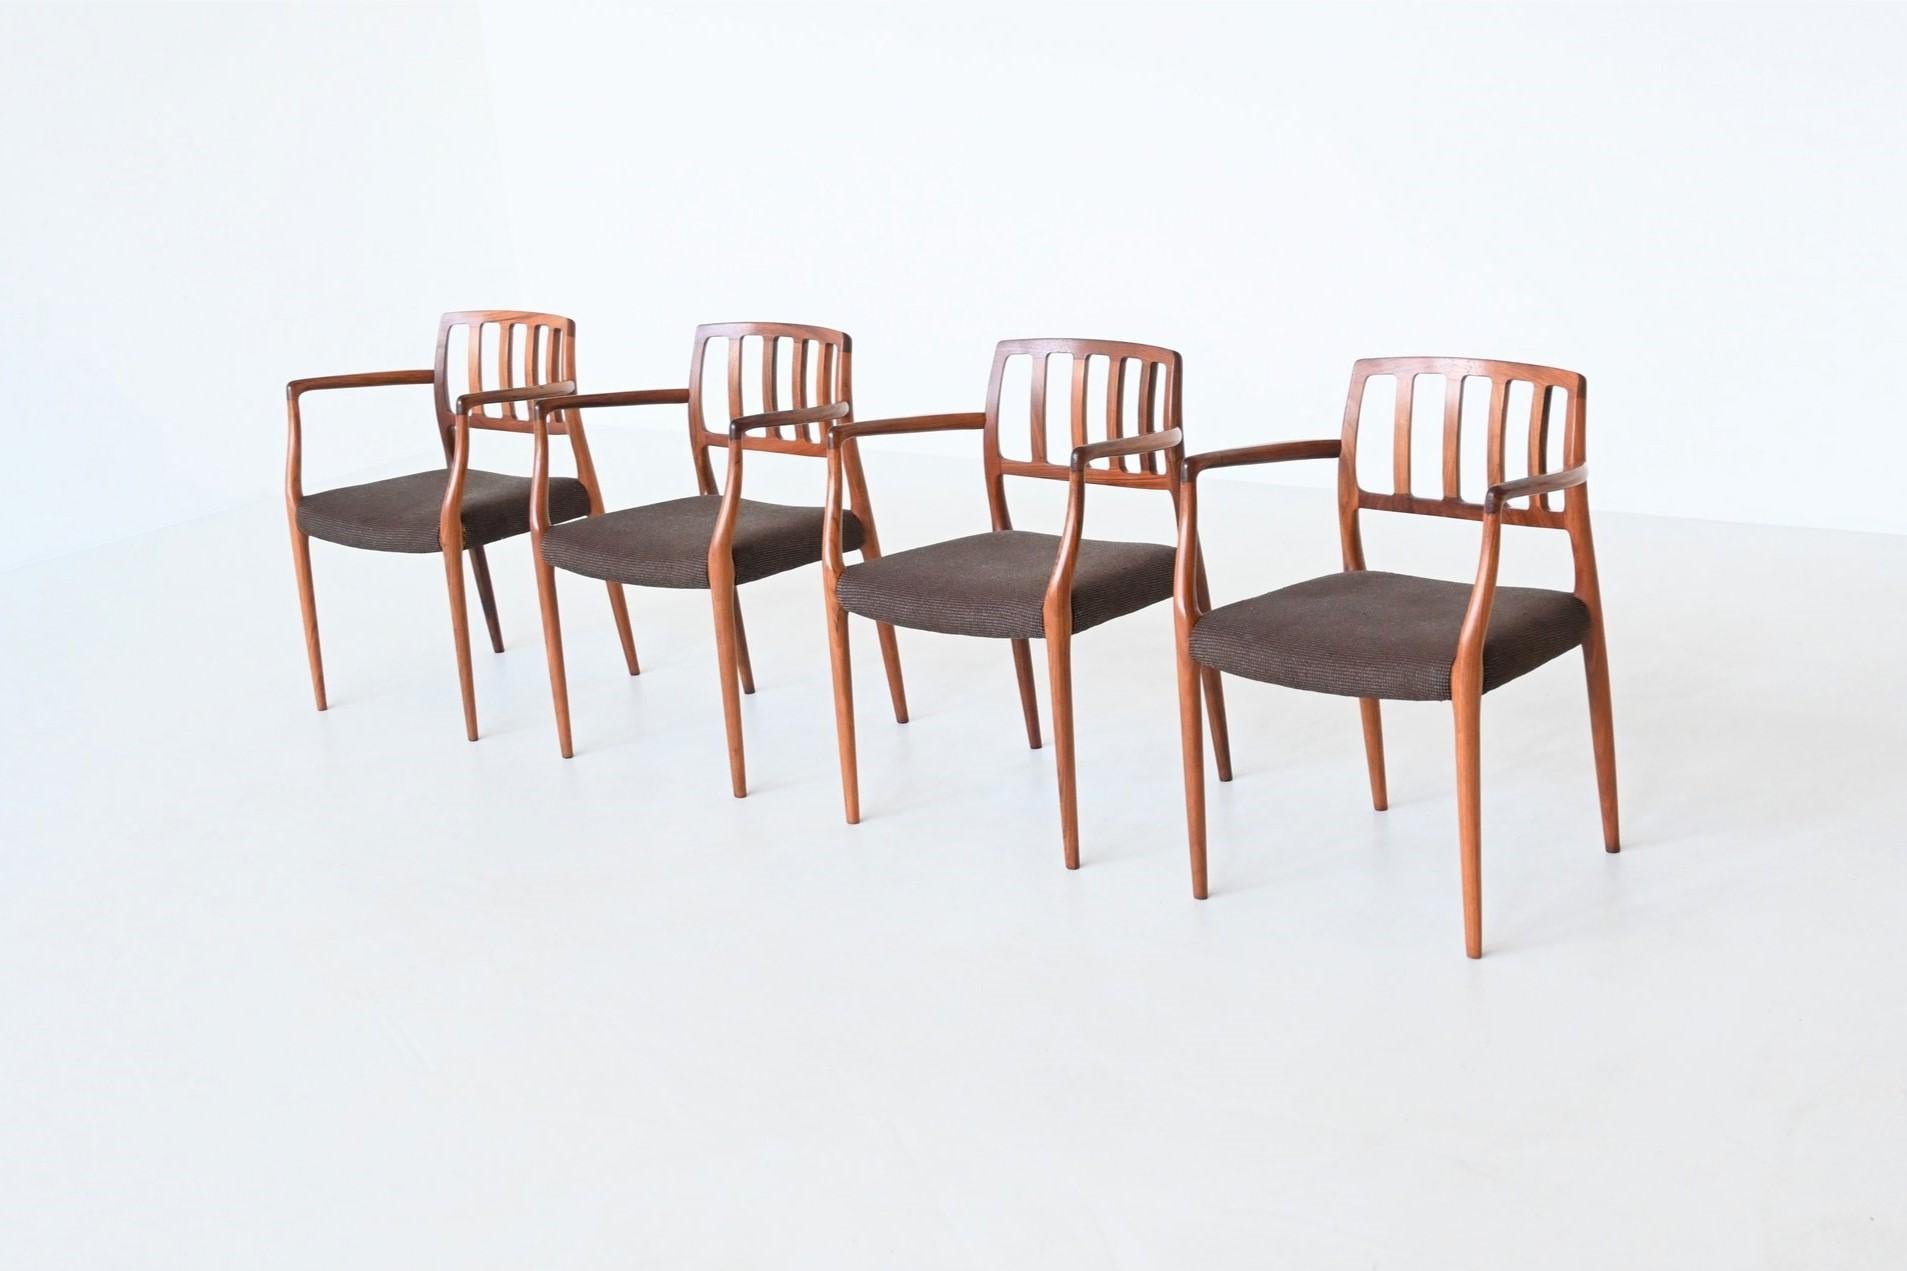 Beautiful shaped and rare set of four armchairs model 66 designed by Niels Otto Møller and manufactured by J.L. Møller Mobelfabrik, Denmark 1974. These sculptural dining chairs are made of solid amazingly grained walnut and the seats are upholstered